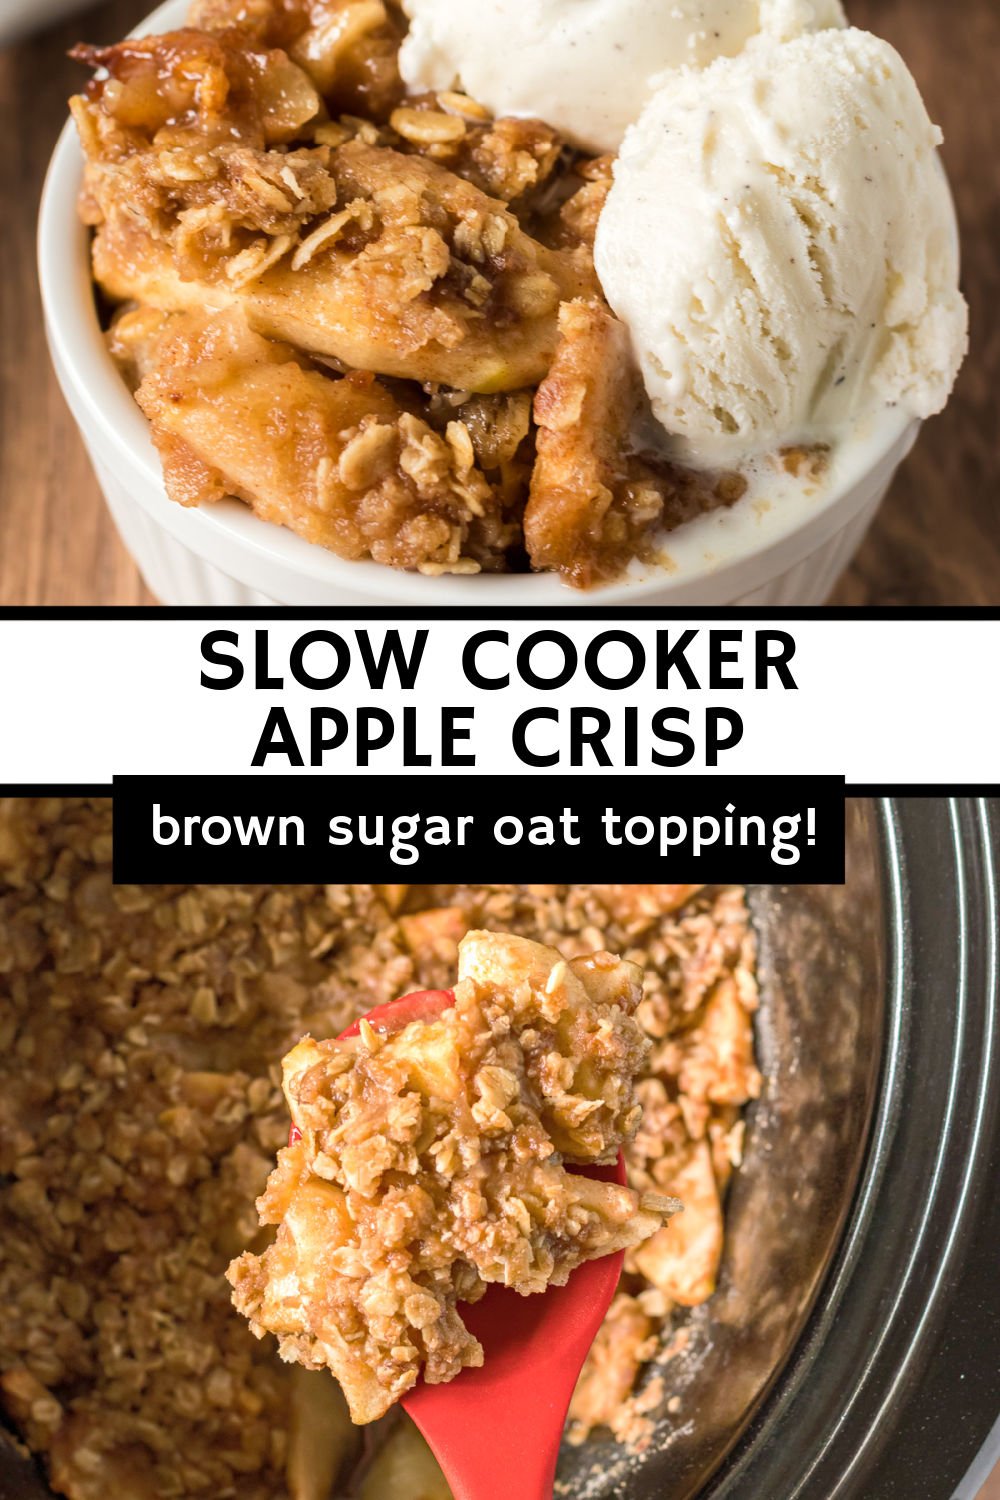 Easy Slow Cooker Apple Crisp with brown sugar cinnamon oat topping is the perfect way to use some of your favorite apples. Served warm or cold, this dessert is a favorite! | www.persnicketyplates.com